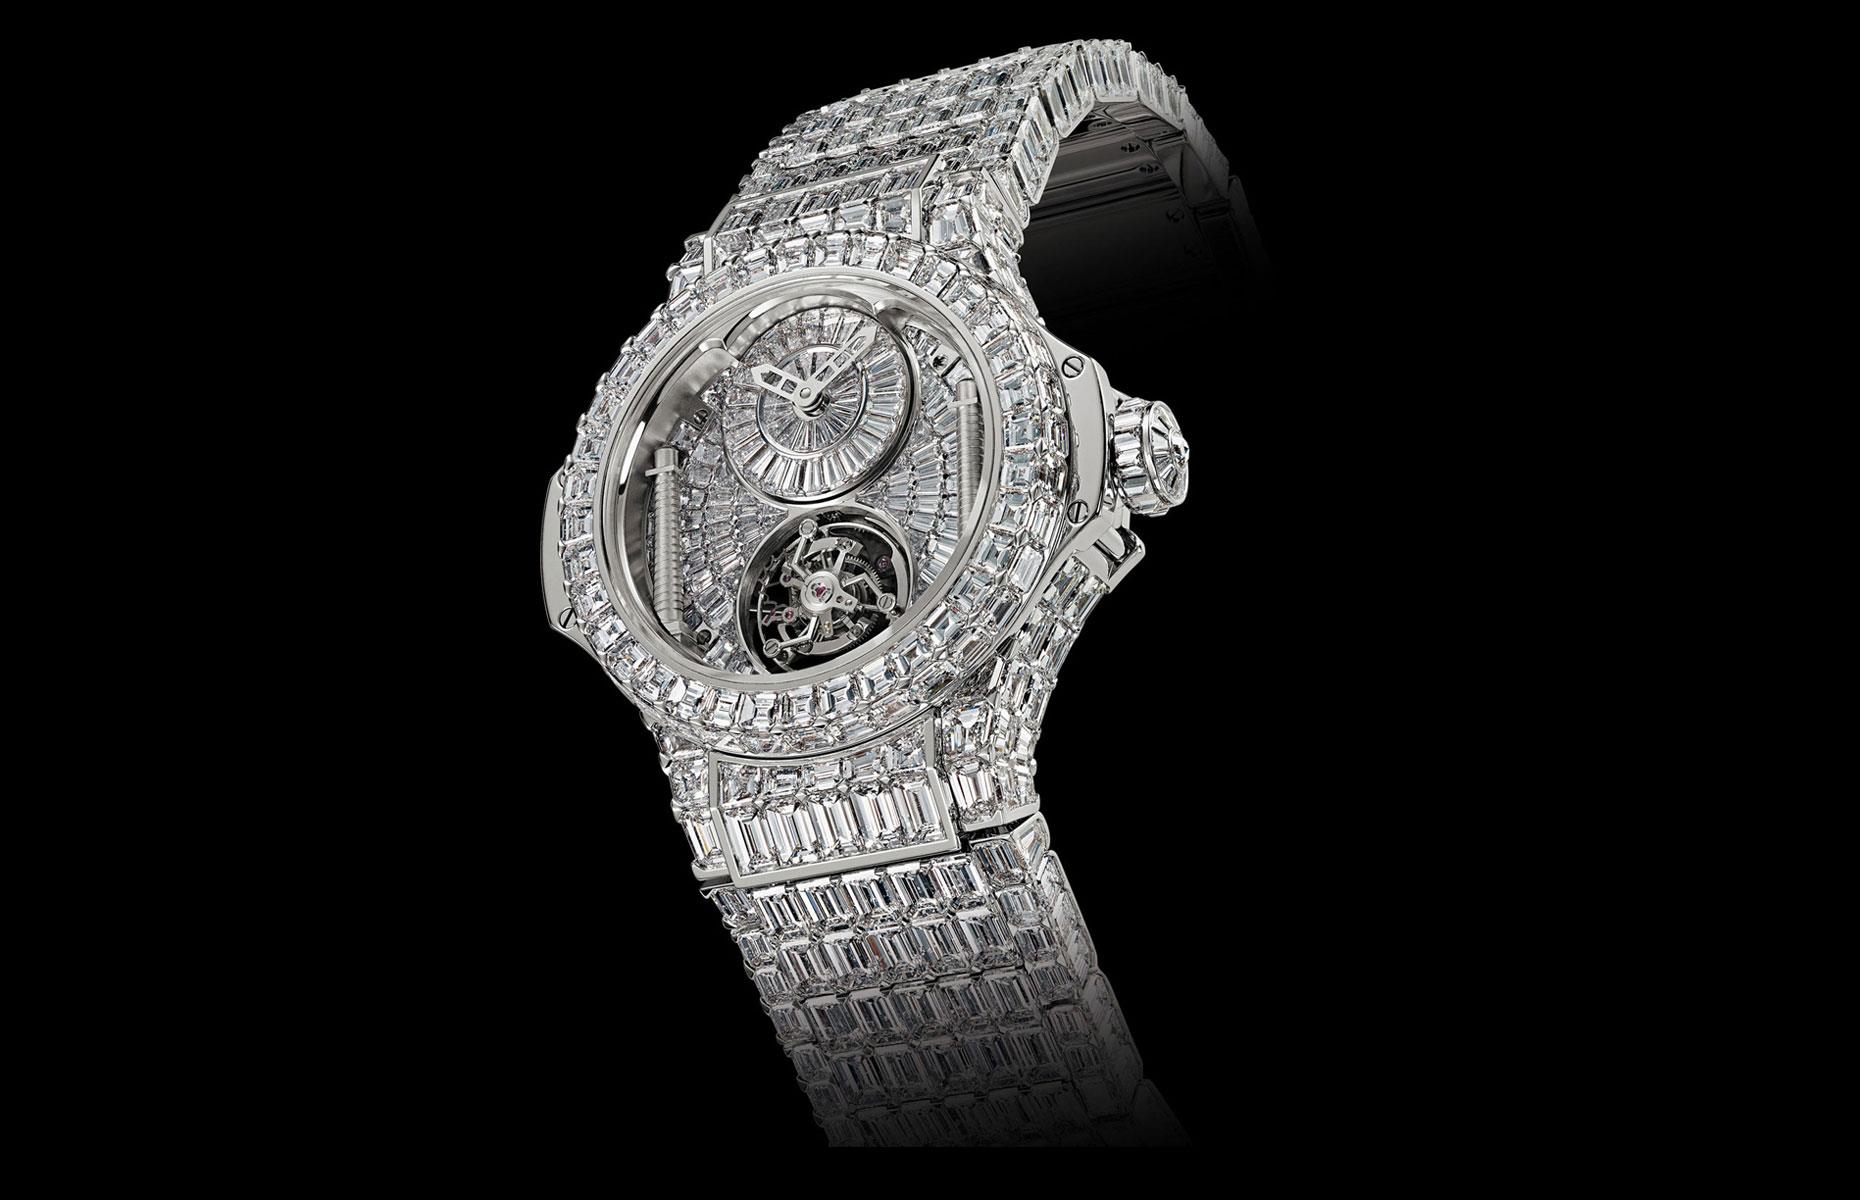 The world's most expensive watches | lovemoney.com